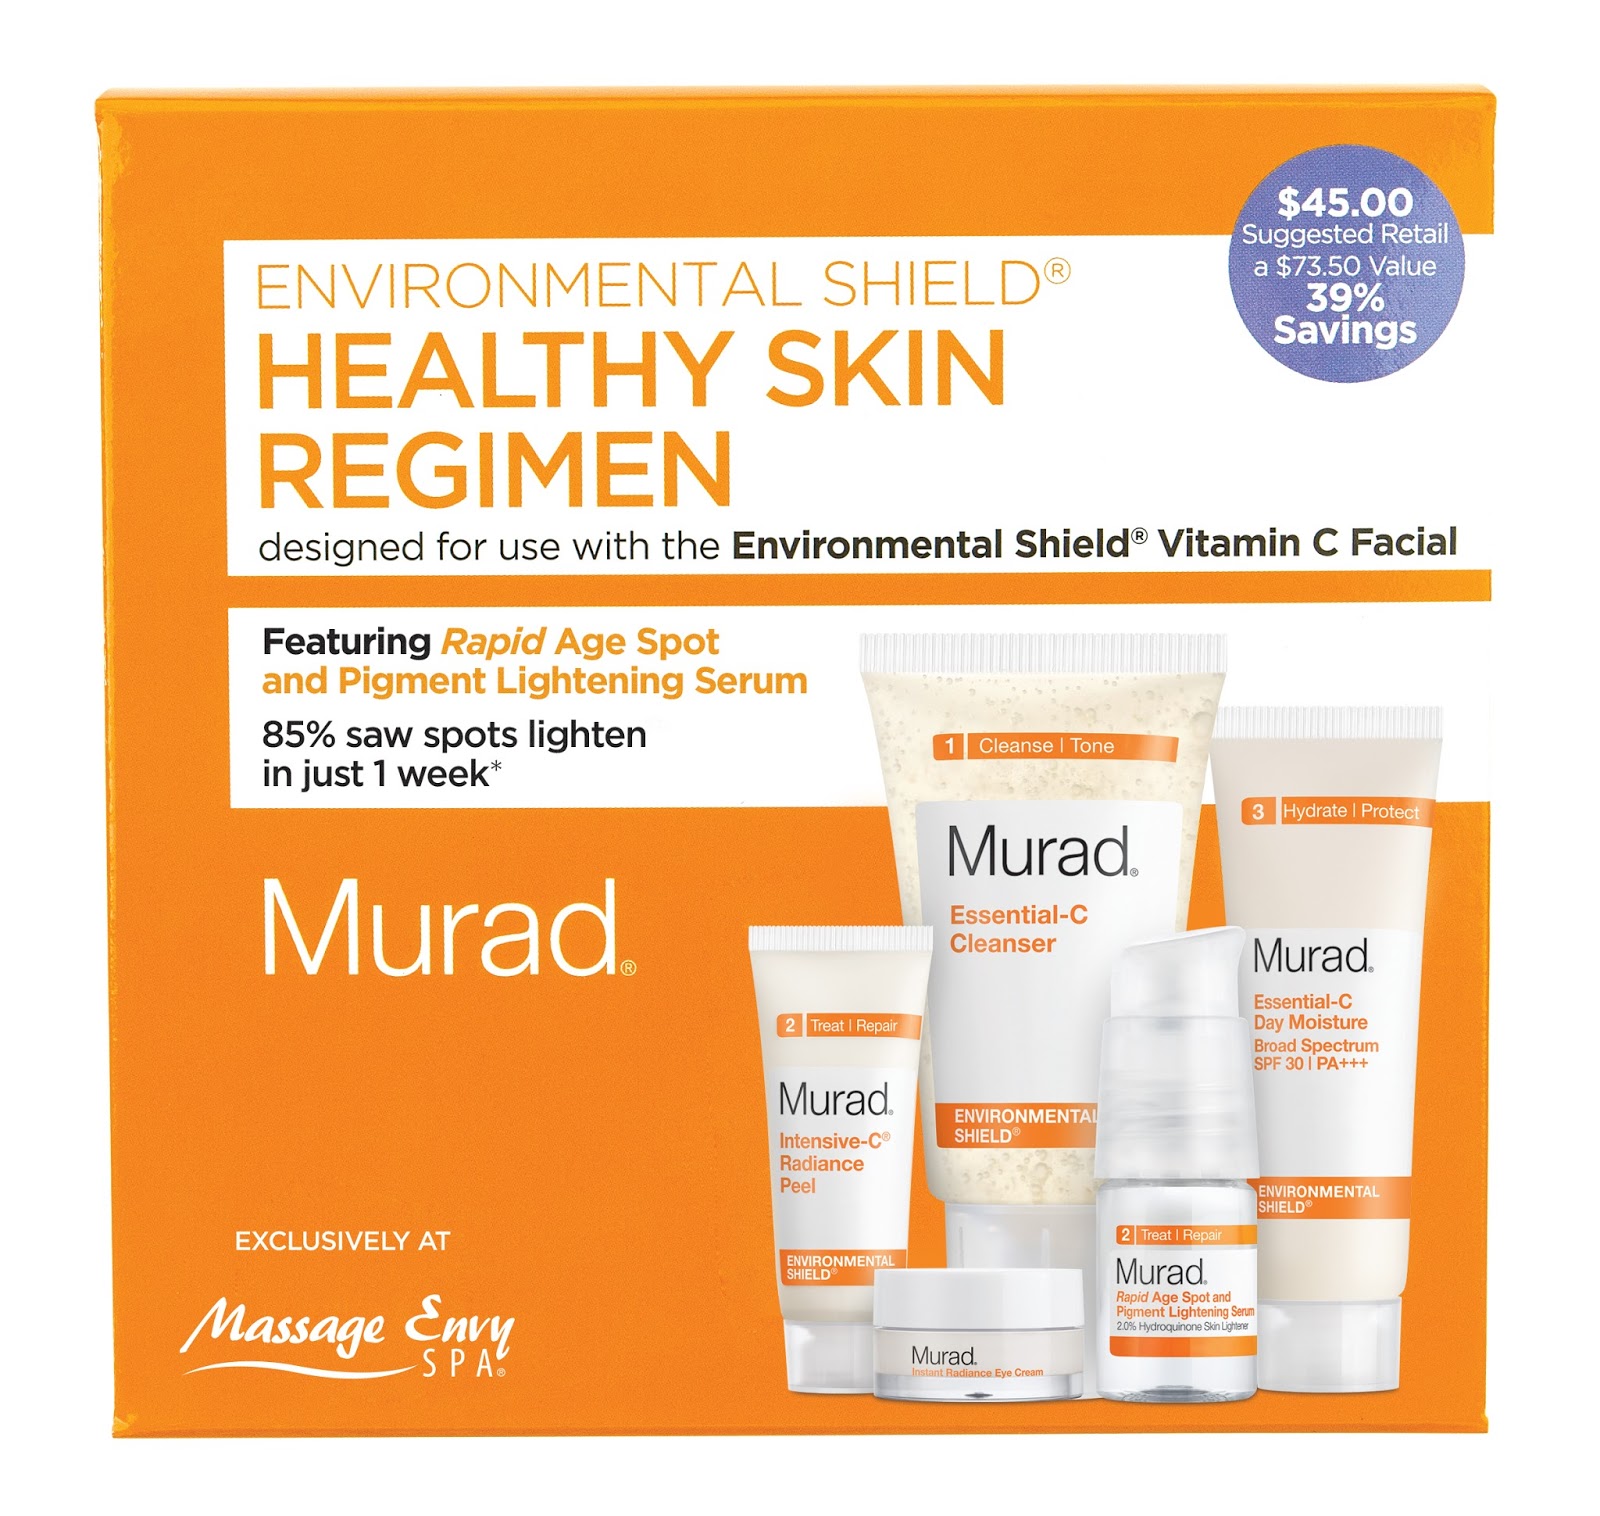 Massage Envy Facial And Murad Skincare Giveaway The Beauty Isle